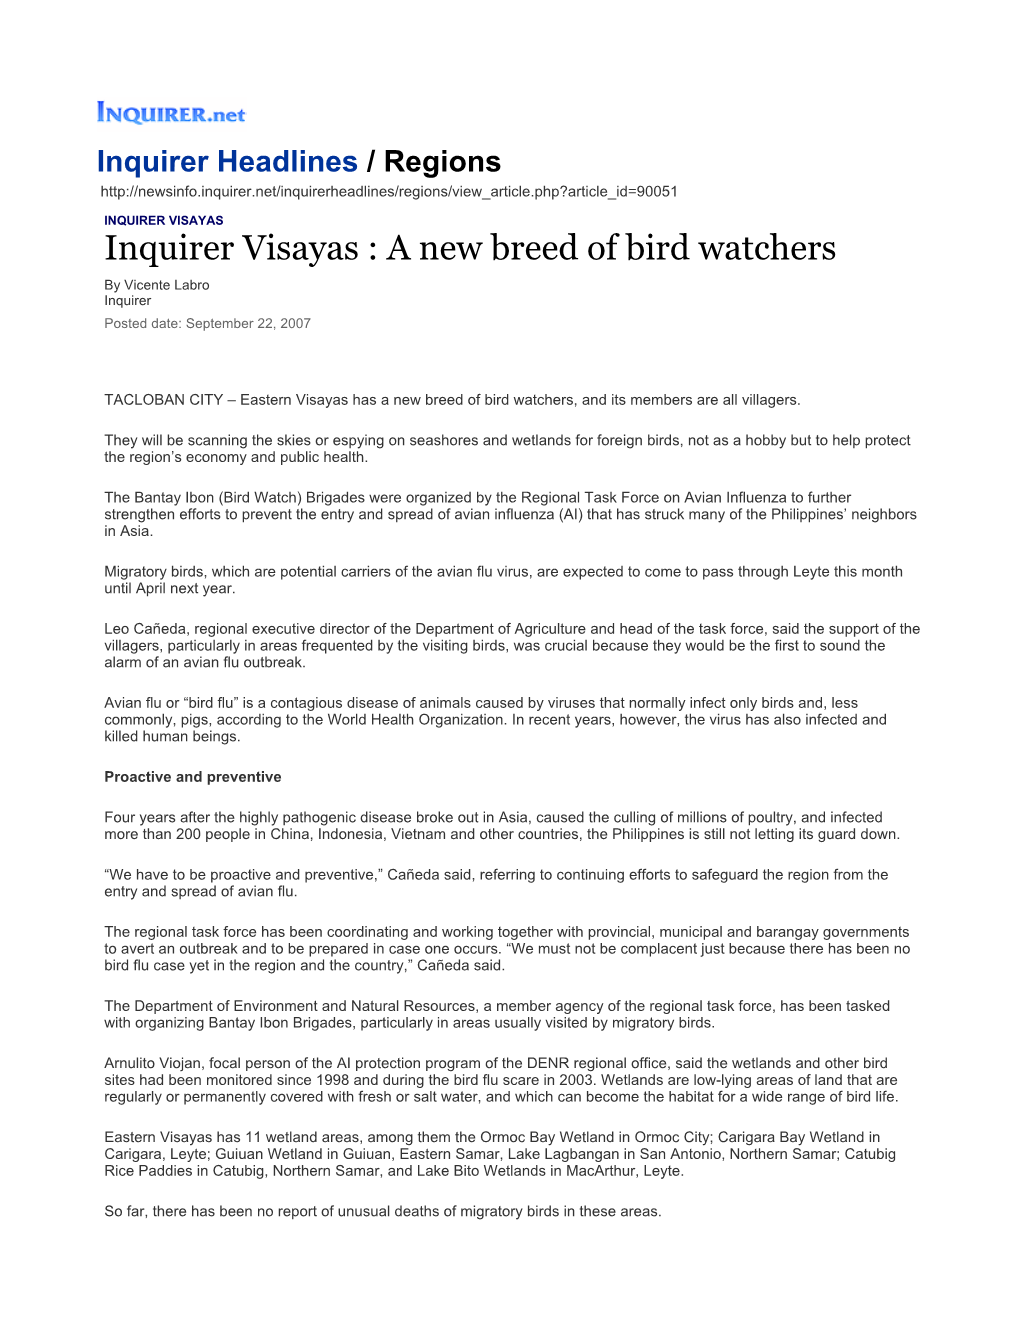 Inquirer Visayas : a New Breed of Bird Watchers by Vicente Labro Inquirer Posted Date: September 22, 2007